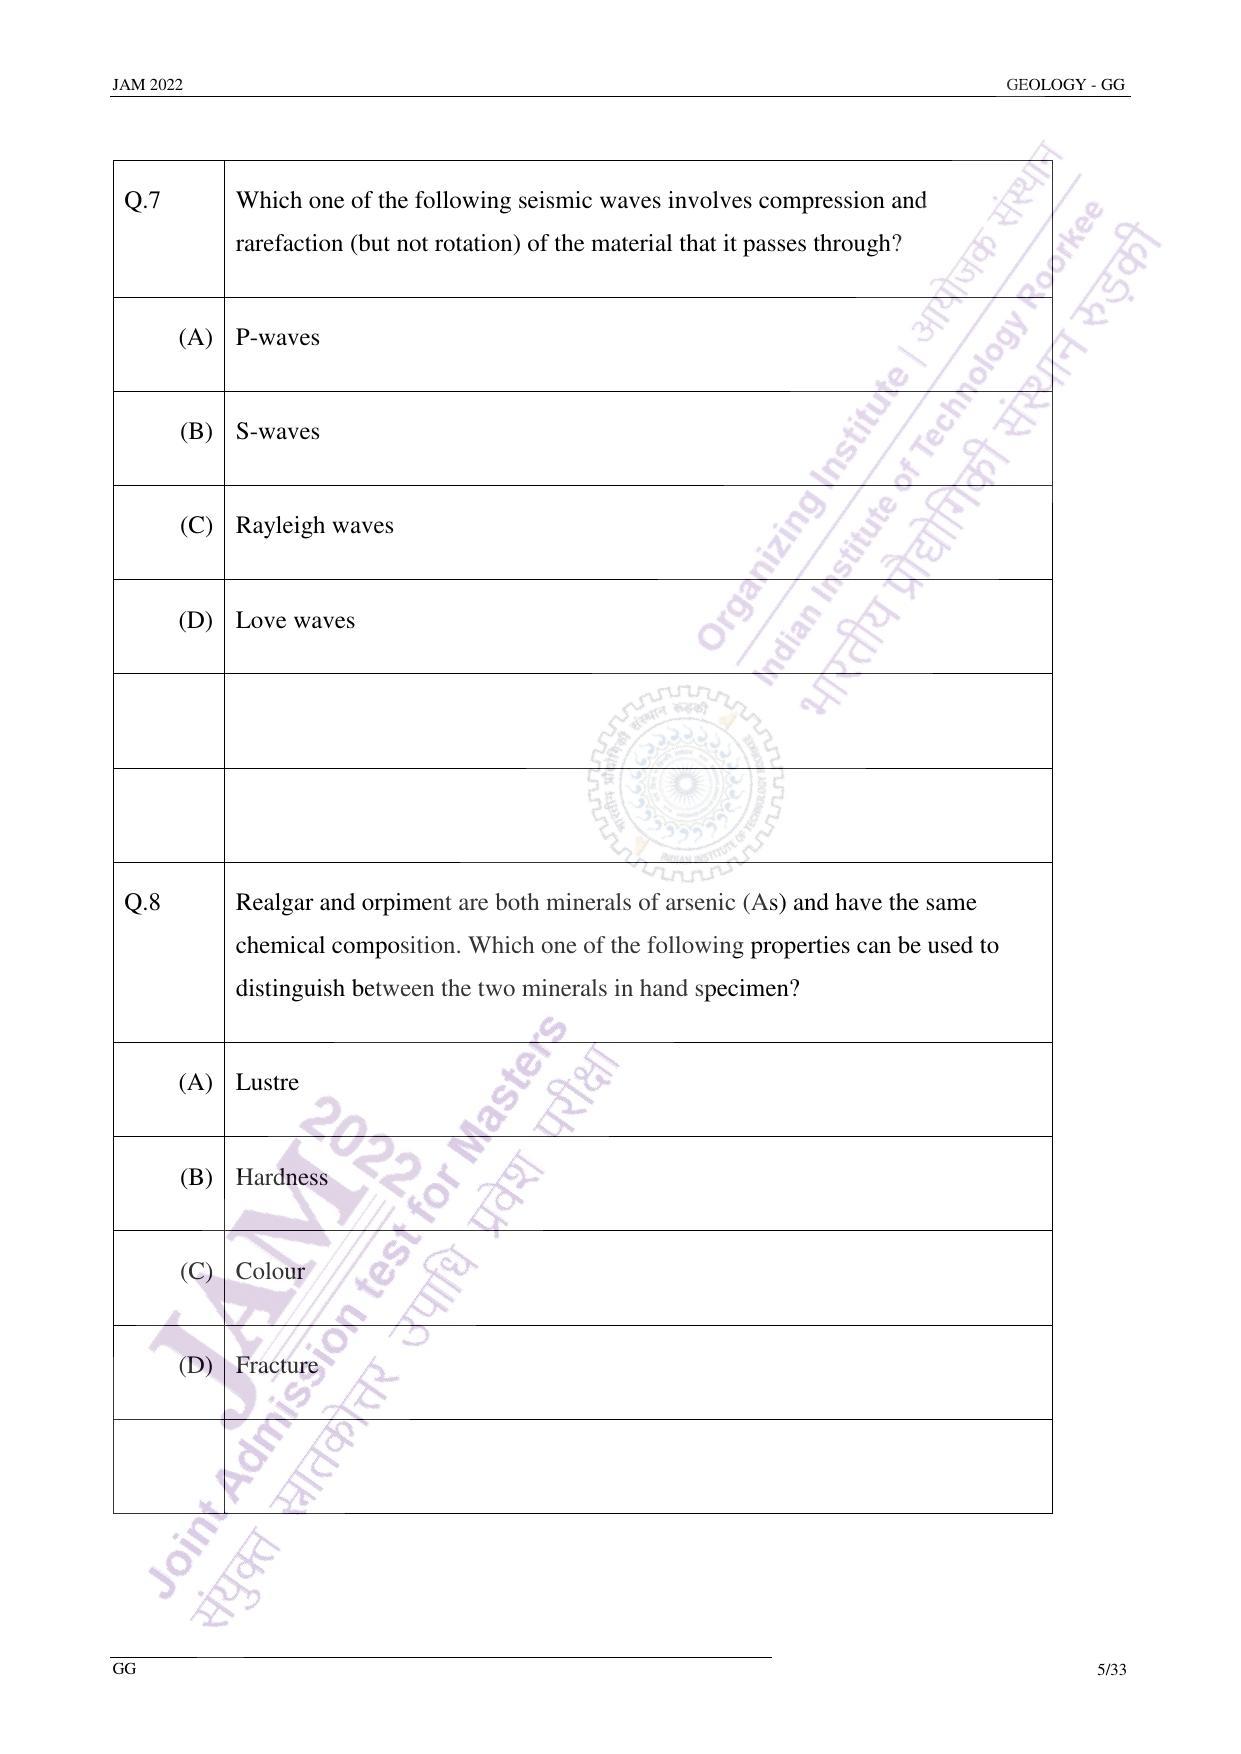 JAM 2022: GG Question Paper - Page 4